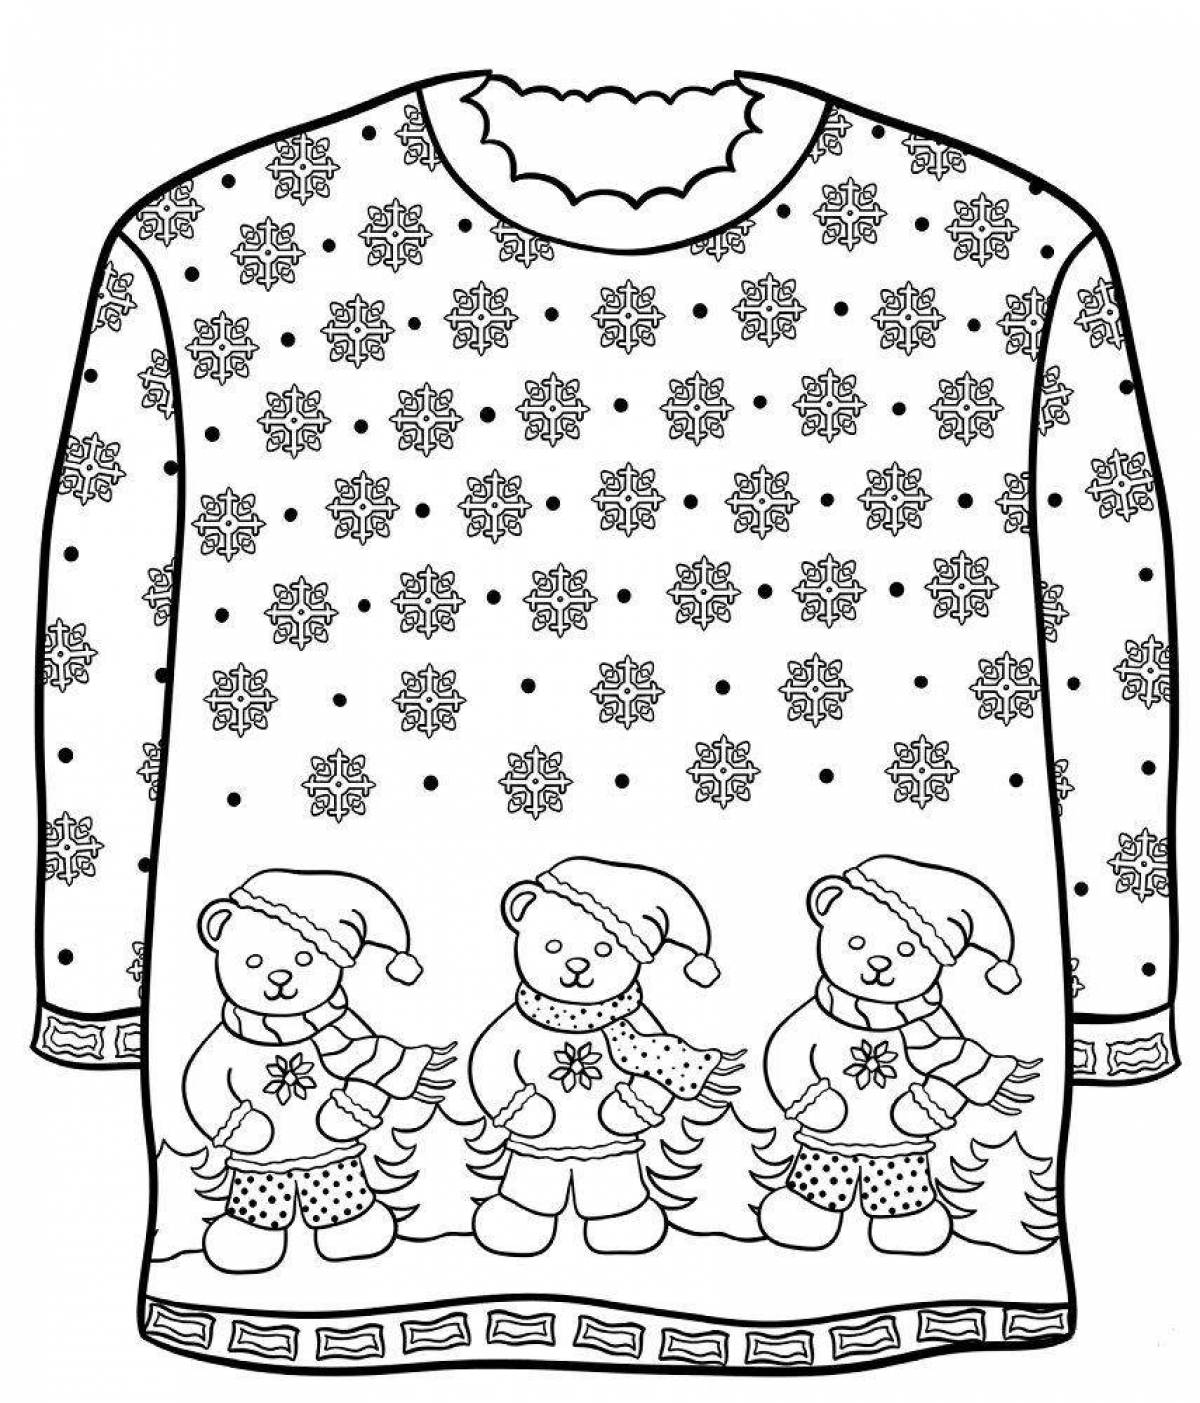 Cute sweater coloring for kids